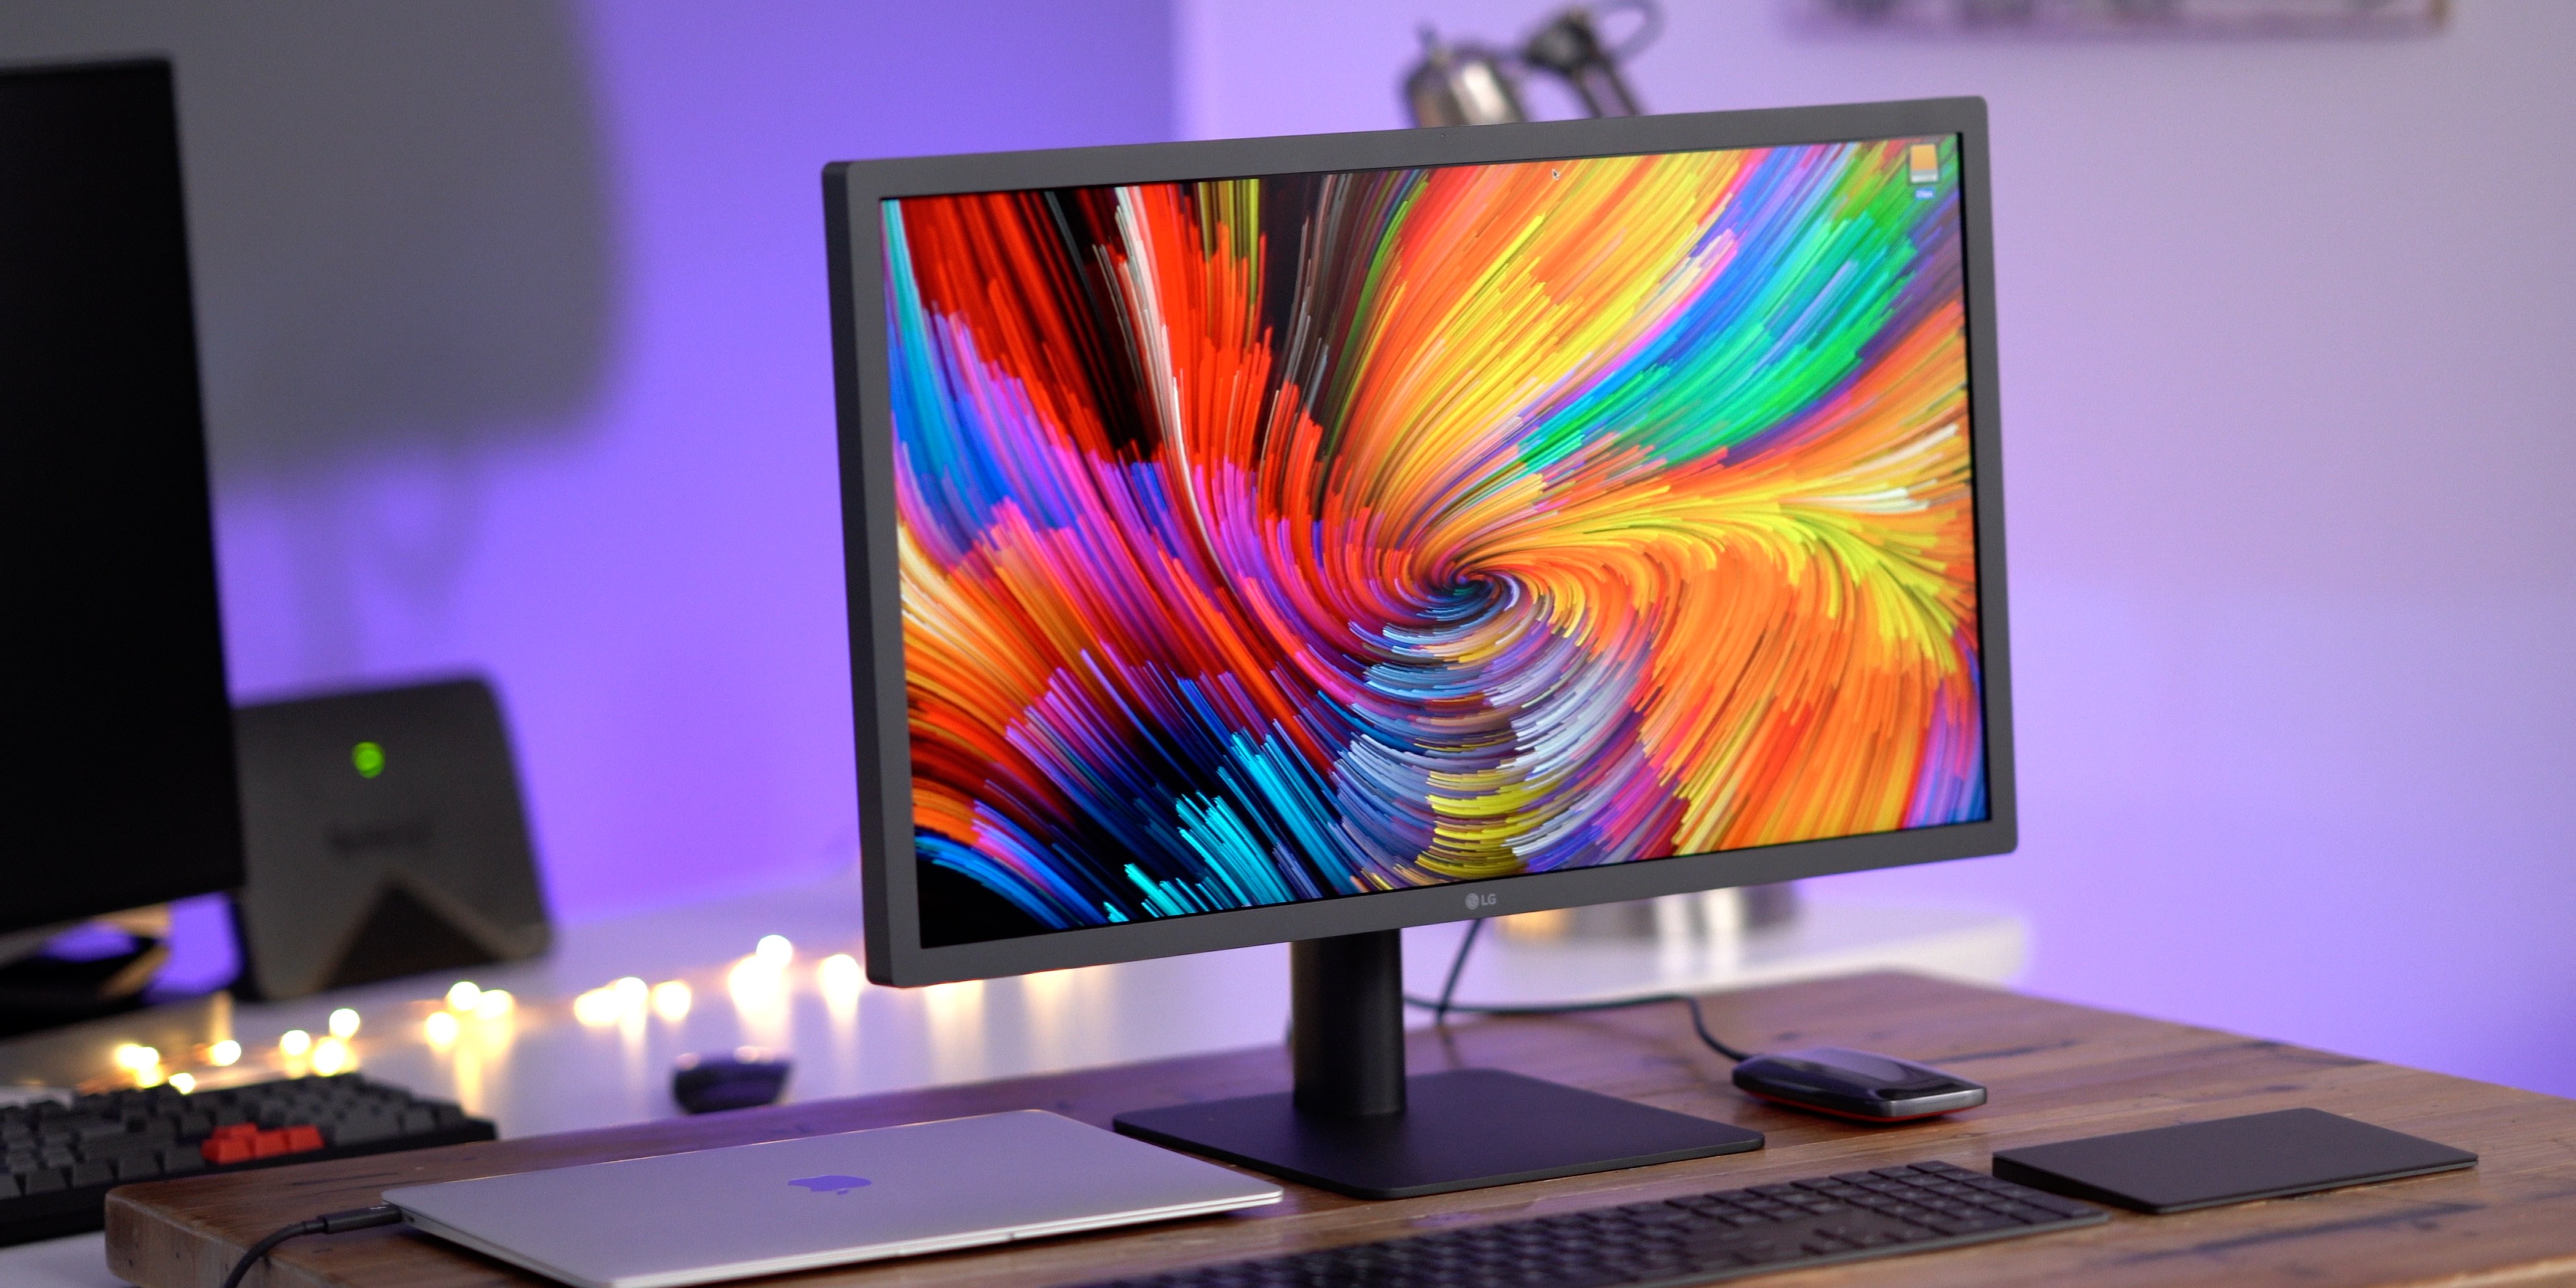 Review: LG UltraFine 4K Display (2019) - two Thunderbolt 3 ports ...